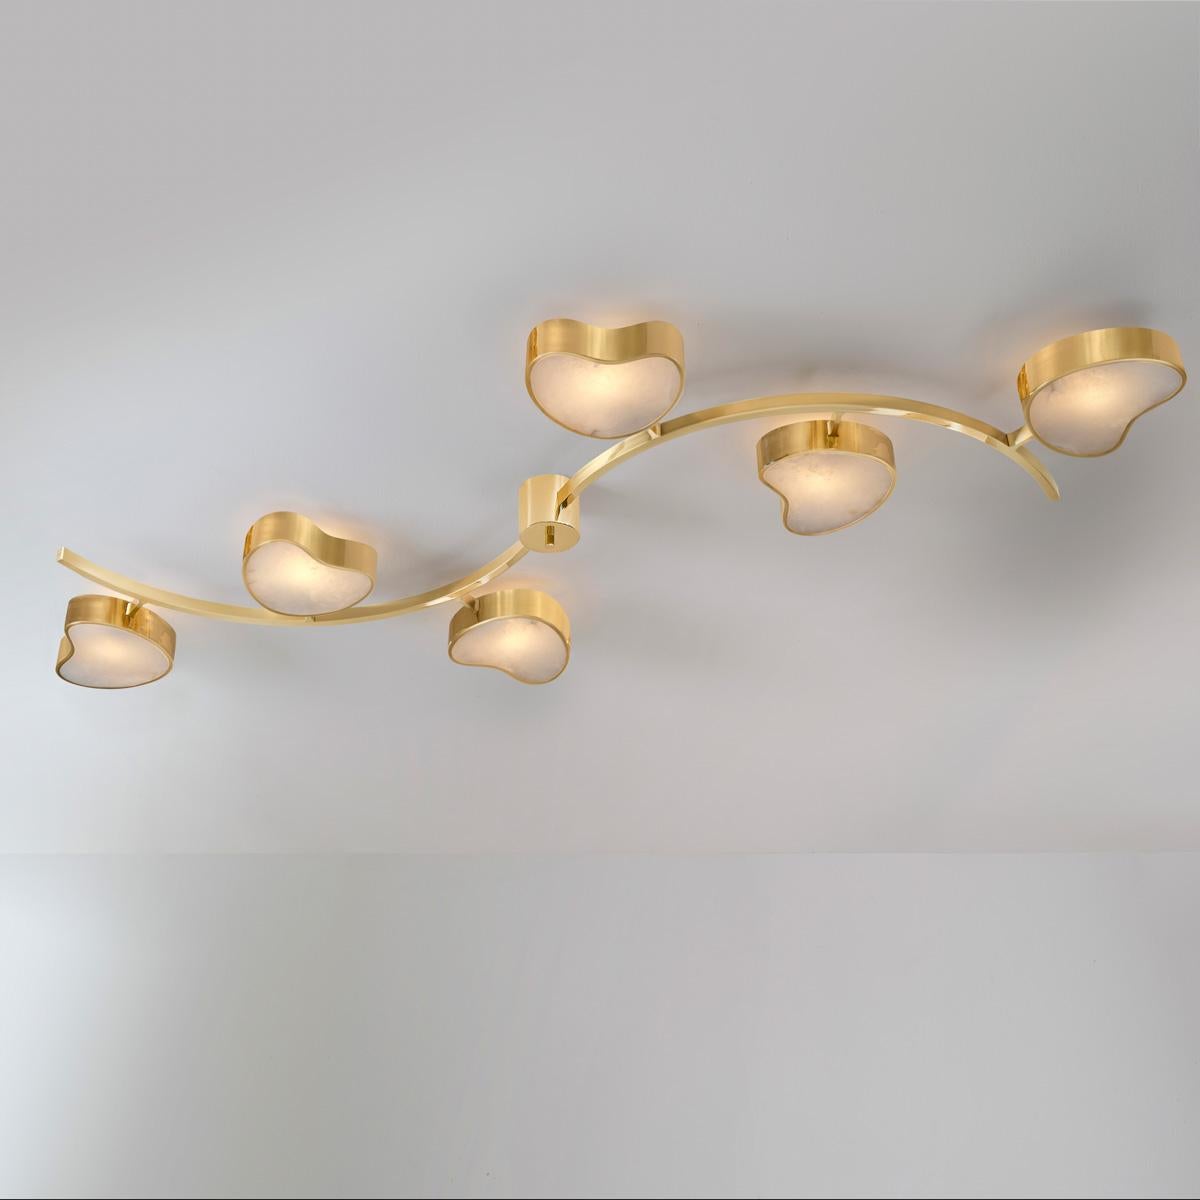 Modern Cuore N.6 Ceiling Light by Gaspare Asaro. Polished Brass Finish For Sale